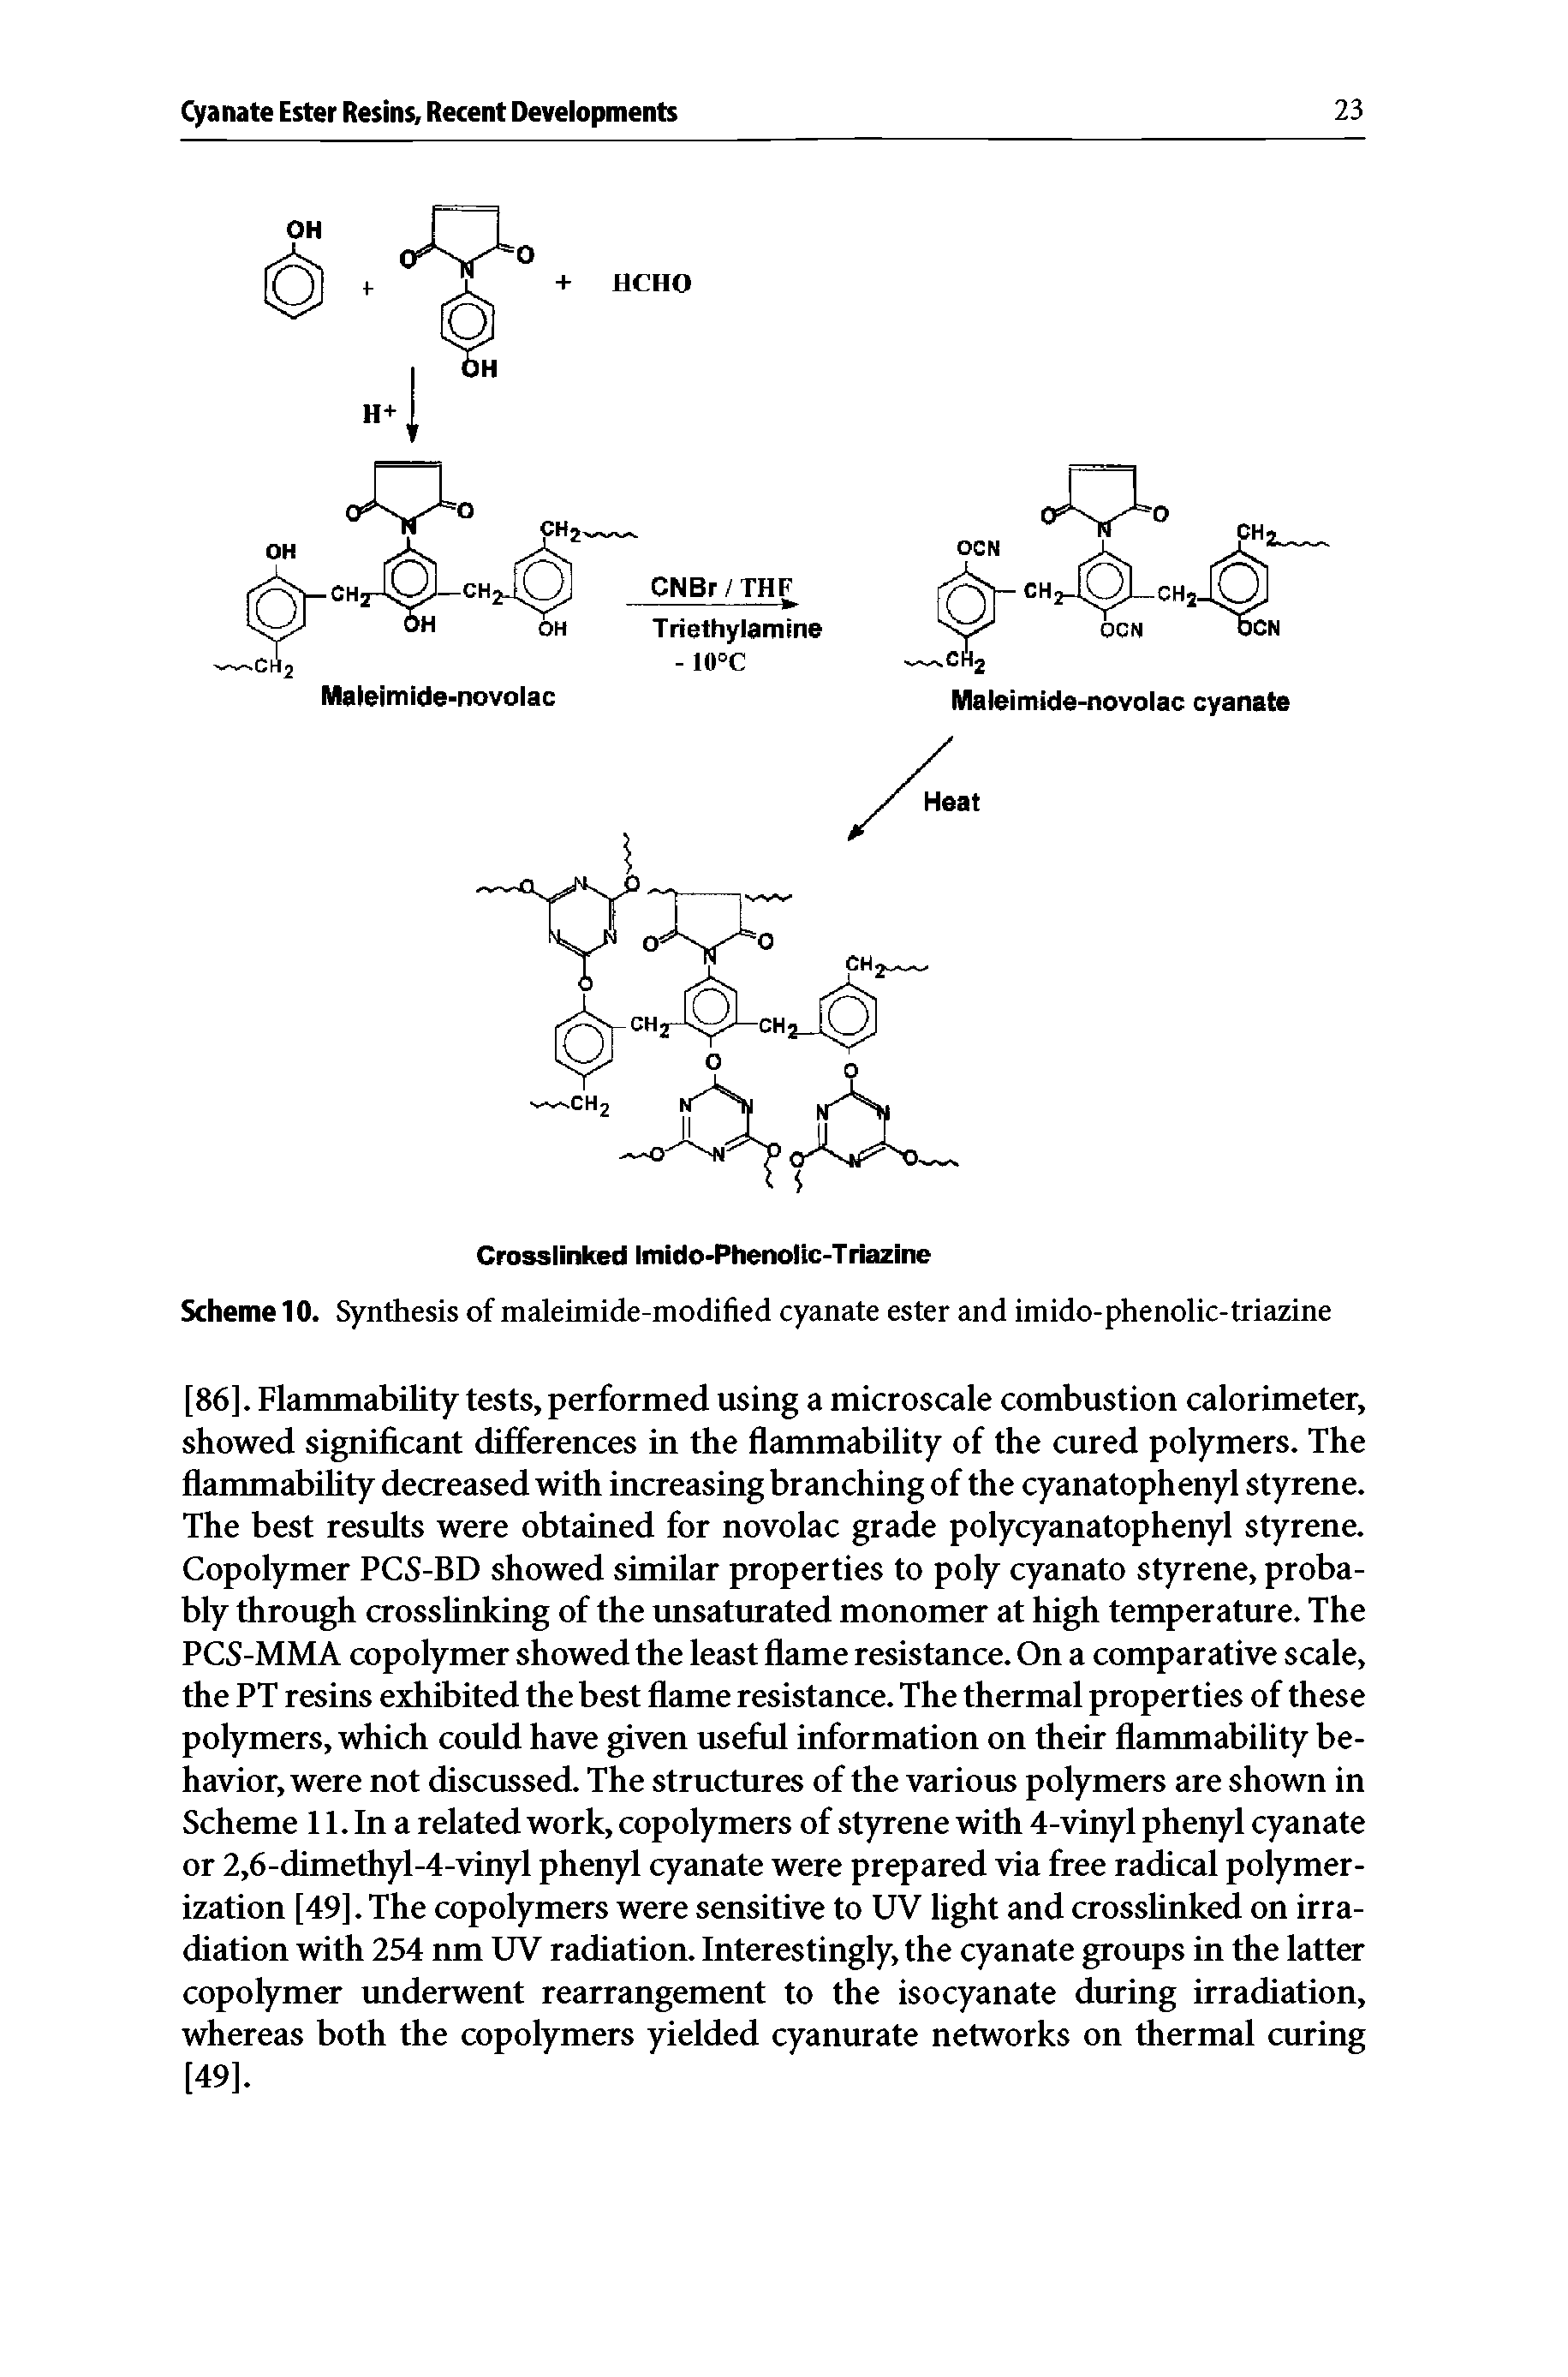 Scheme 10. Synthesis of maleimide-modified cyanate ester and imido-phenolic-triazine...